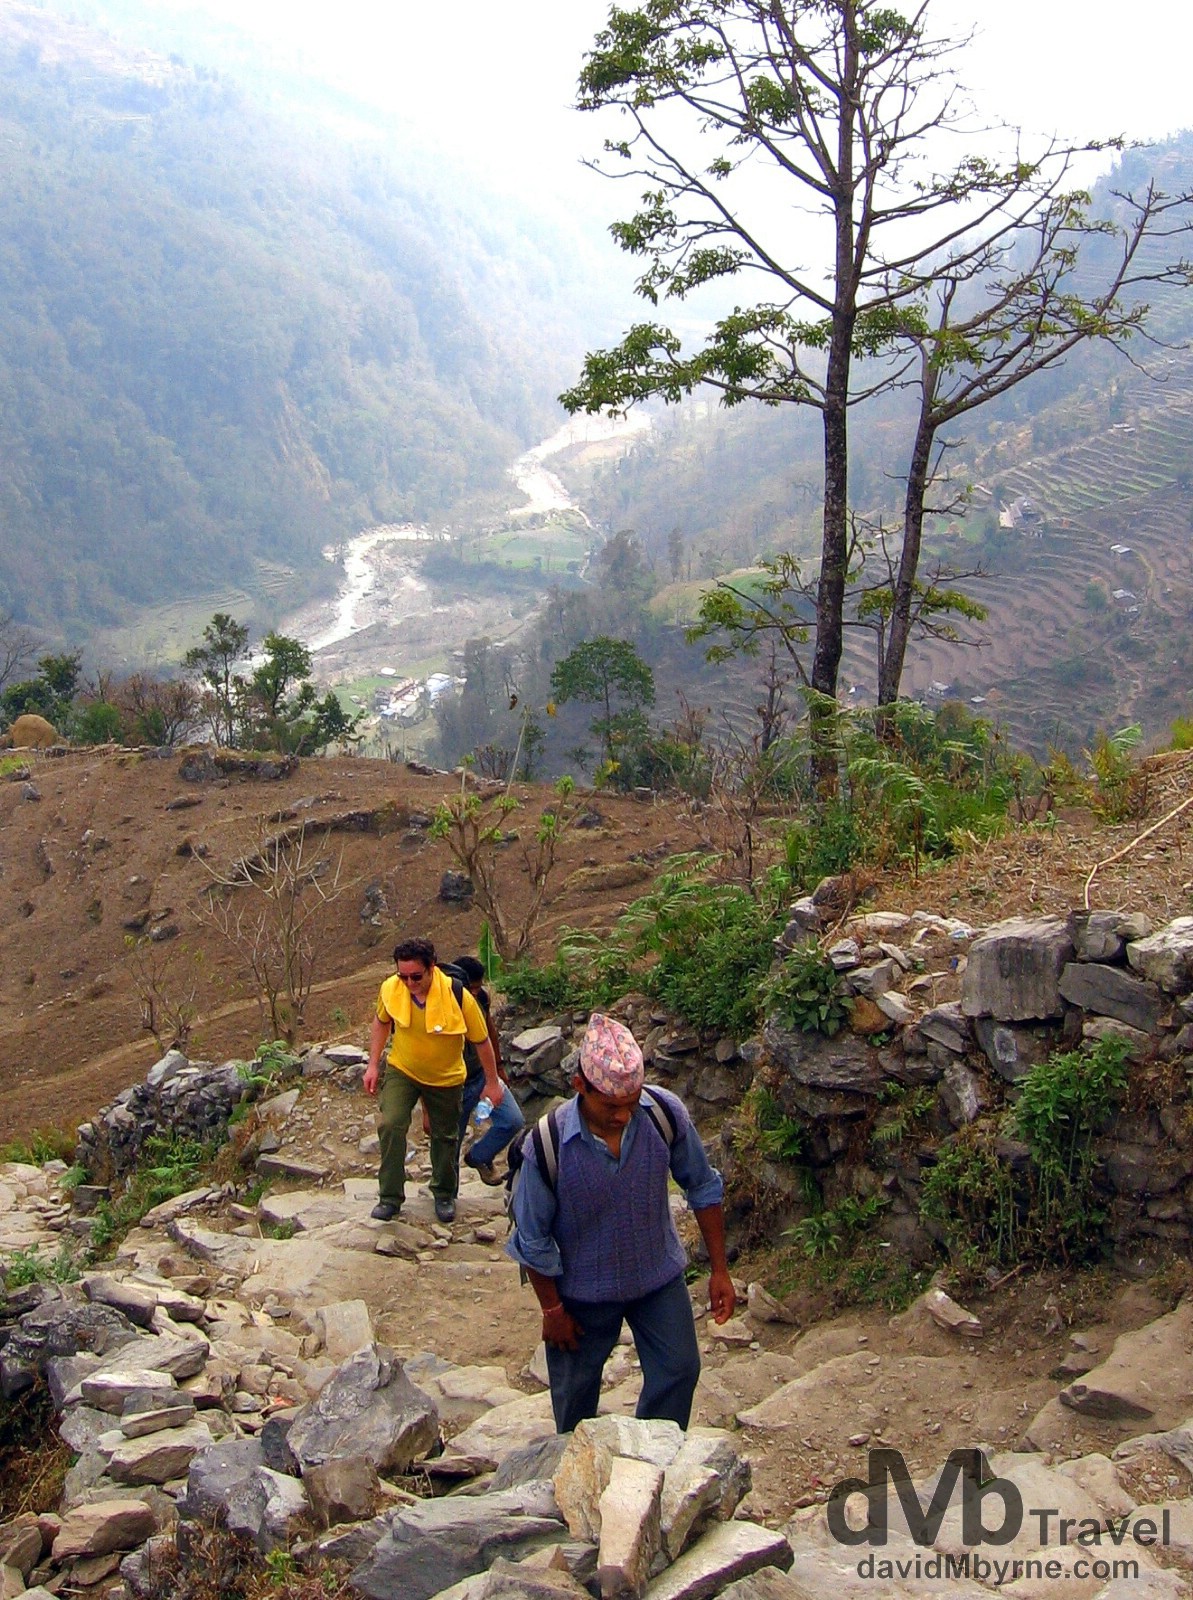 On the trail from Birethanti to Ghandruk, Annapurna Conservation Area, western Nepal. March 10th, 2008.